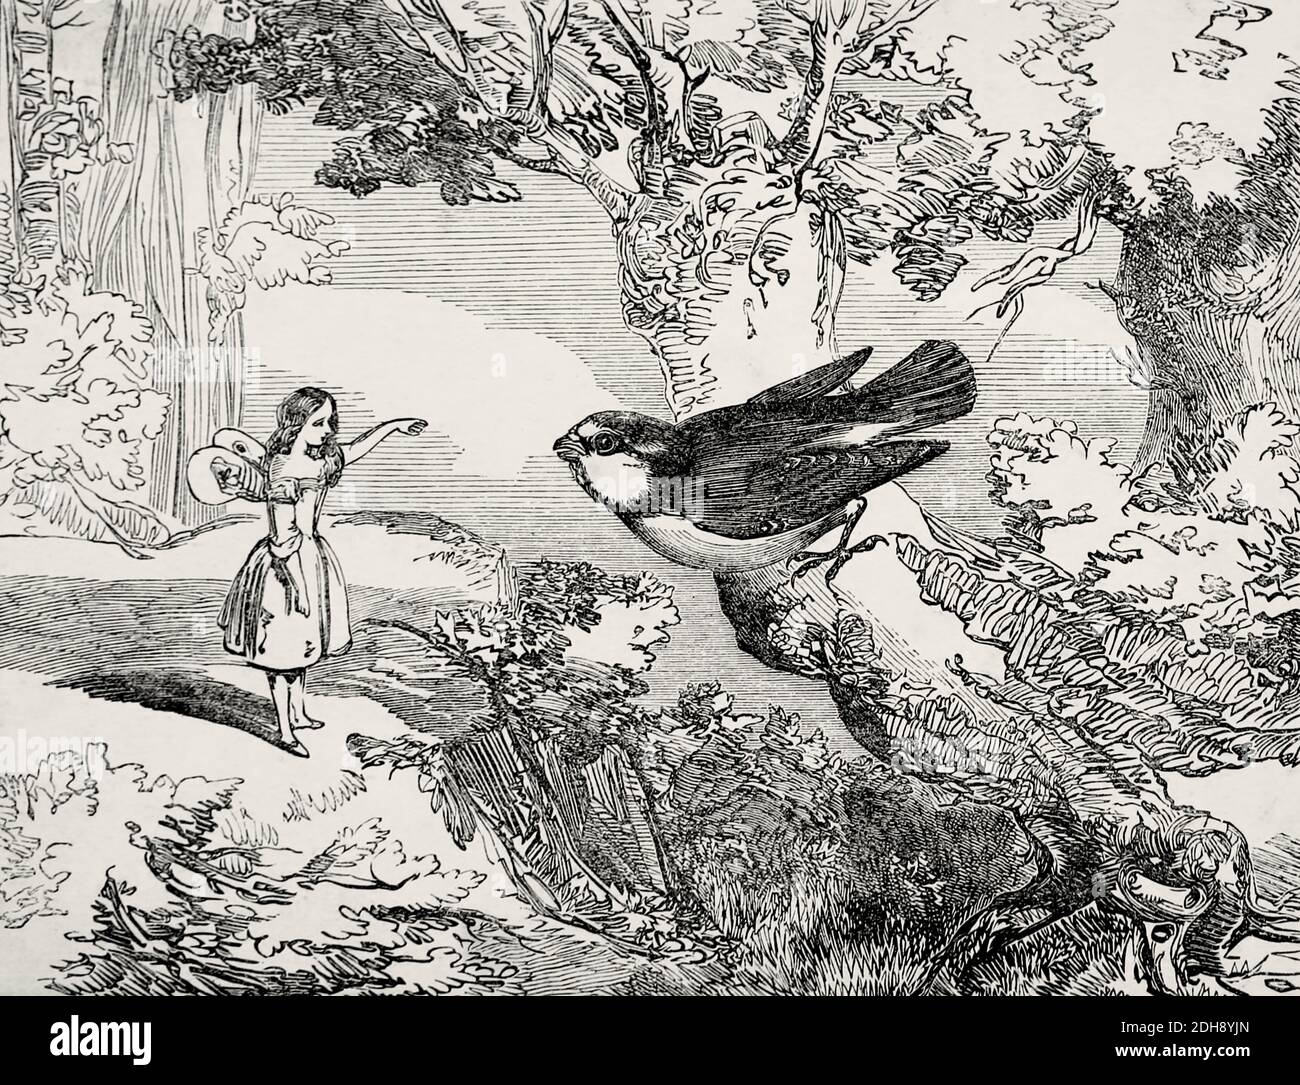 Tiny and her Vanity Fairy Tale from the book 'Fairy tales' by Forrester, Alfred Henry, 1804-1872 [Alfred Henry Forrester (10 September 1804 – 26 May 1872) was an English author, comics artist, illustrator and artist, who was also known under the pseudonym of Alfred Crowquill. Stock Photo